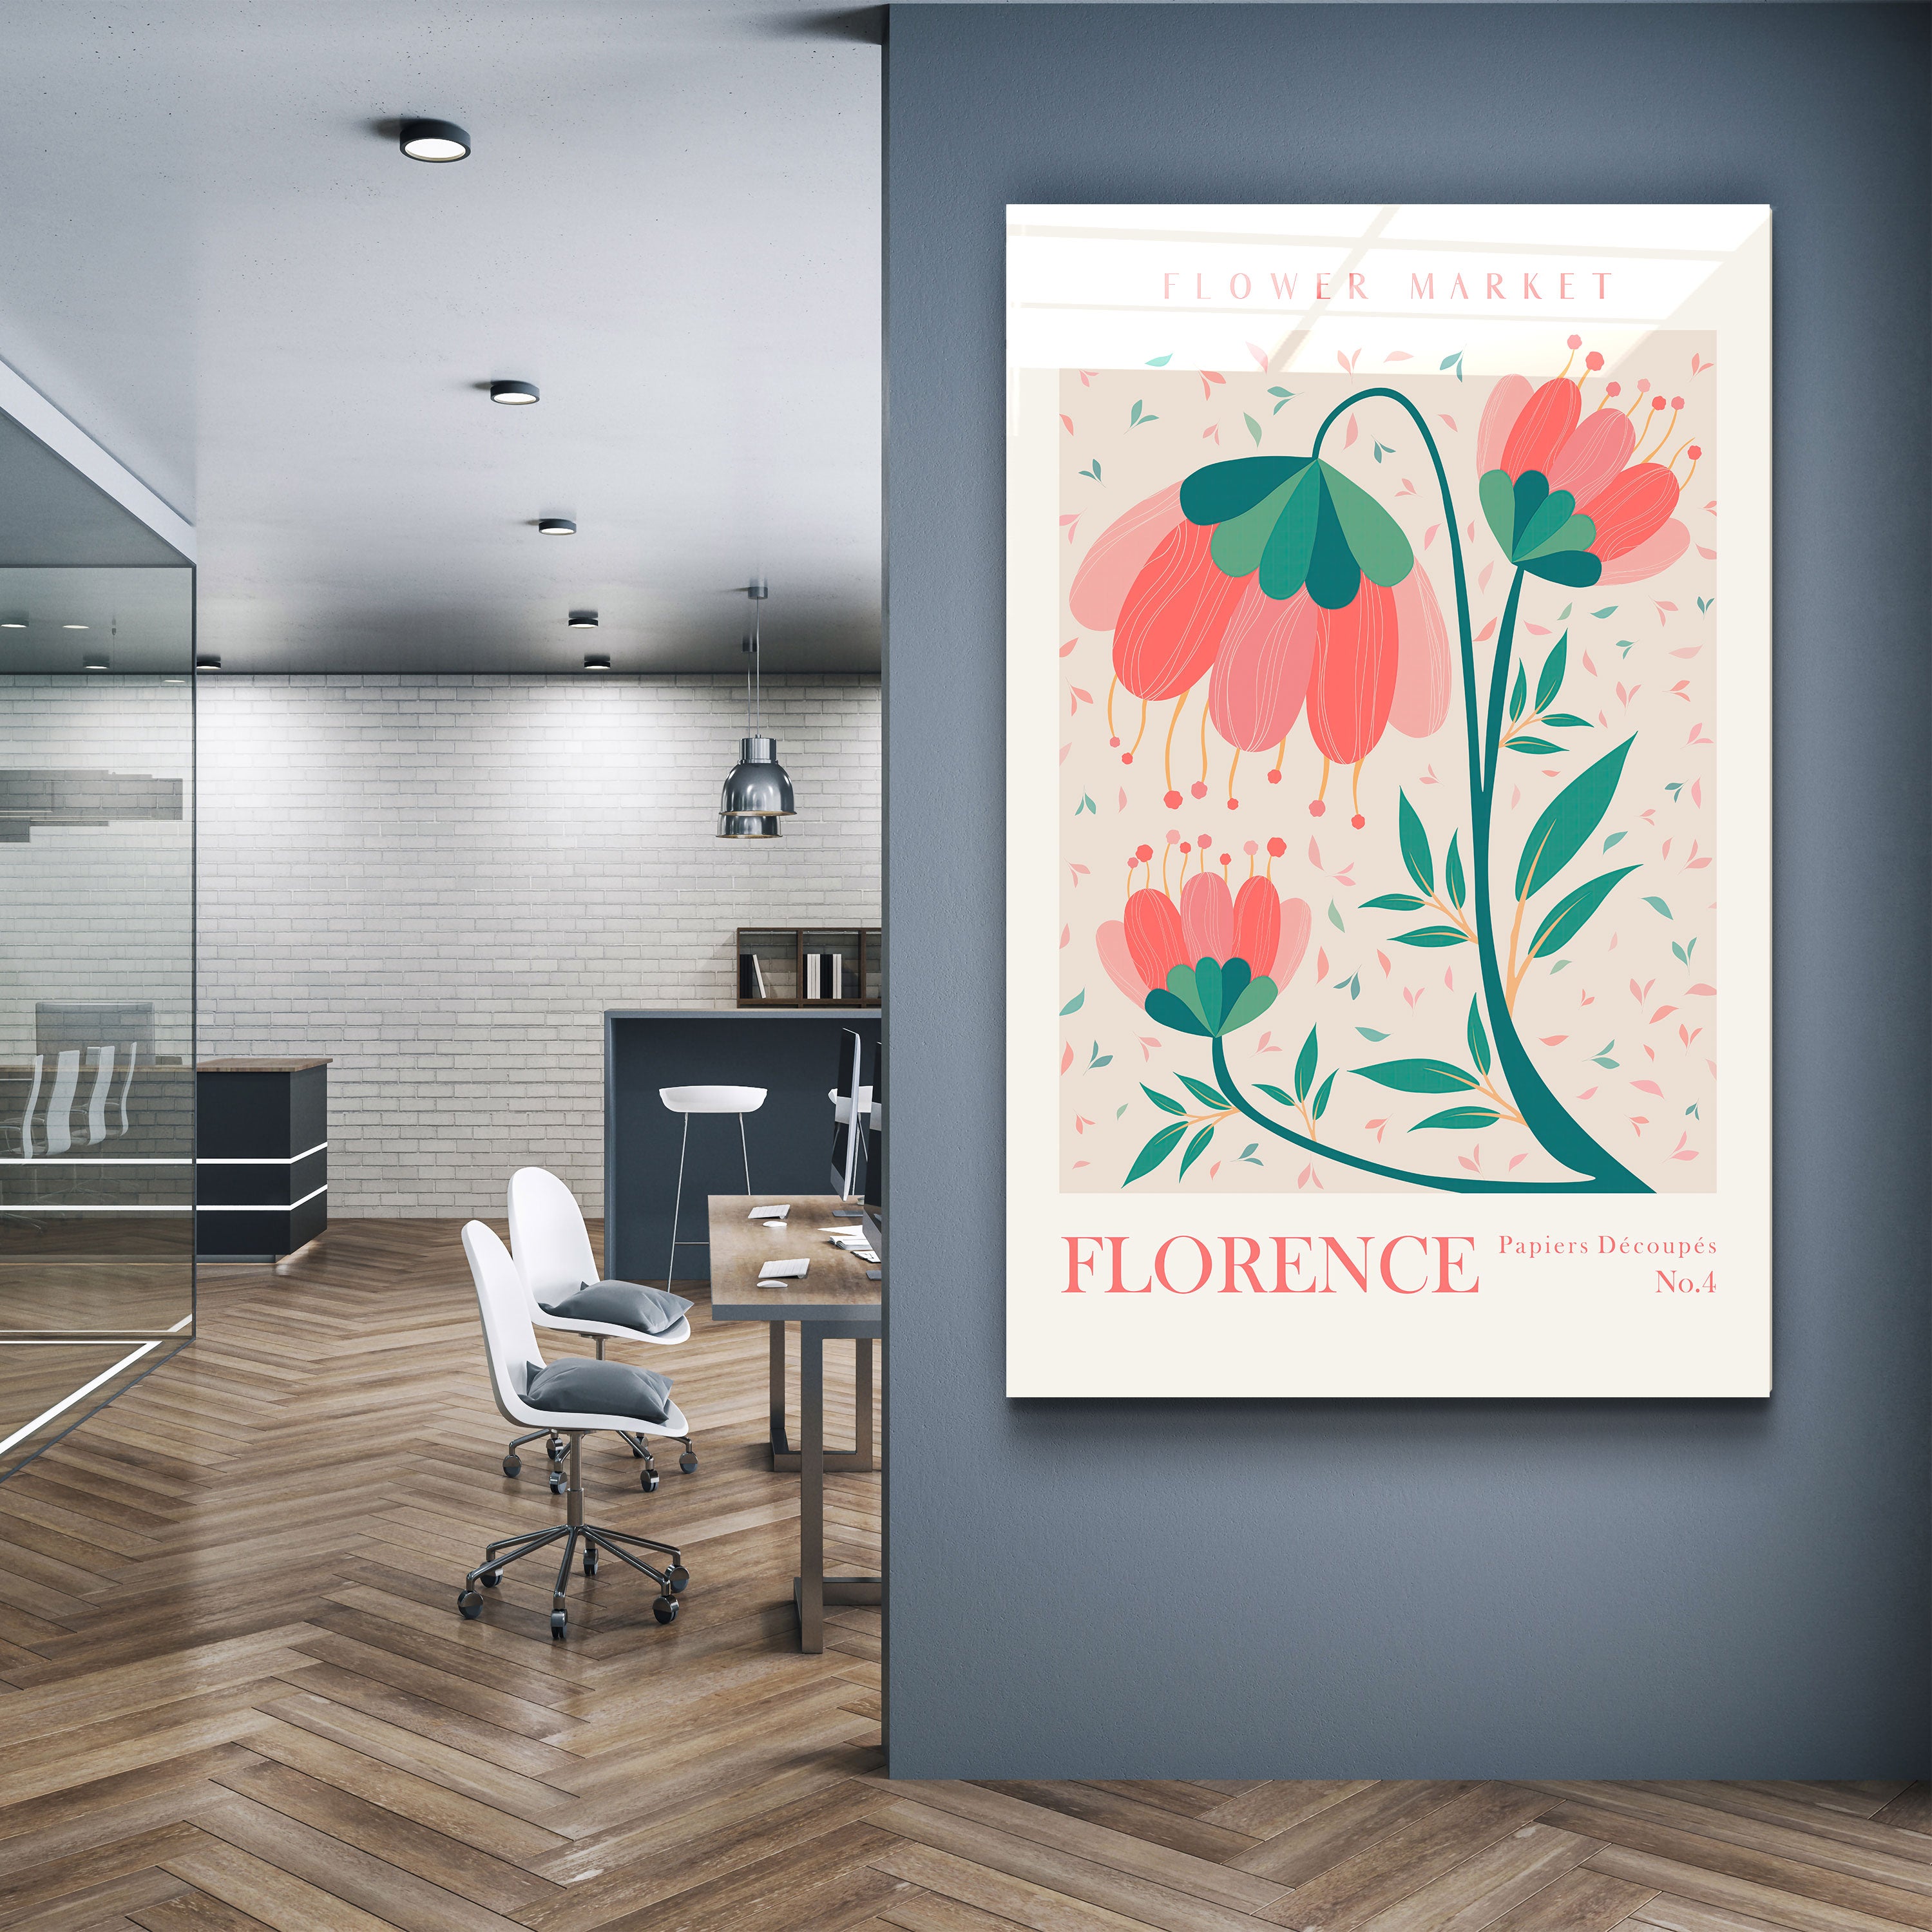 ・"Flower Market No:4 Florence"・Gallery Print Collection Glass Wall Art